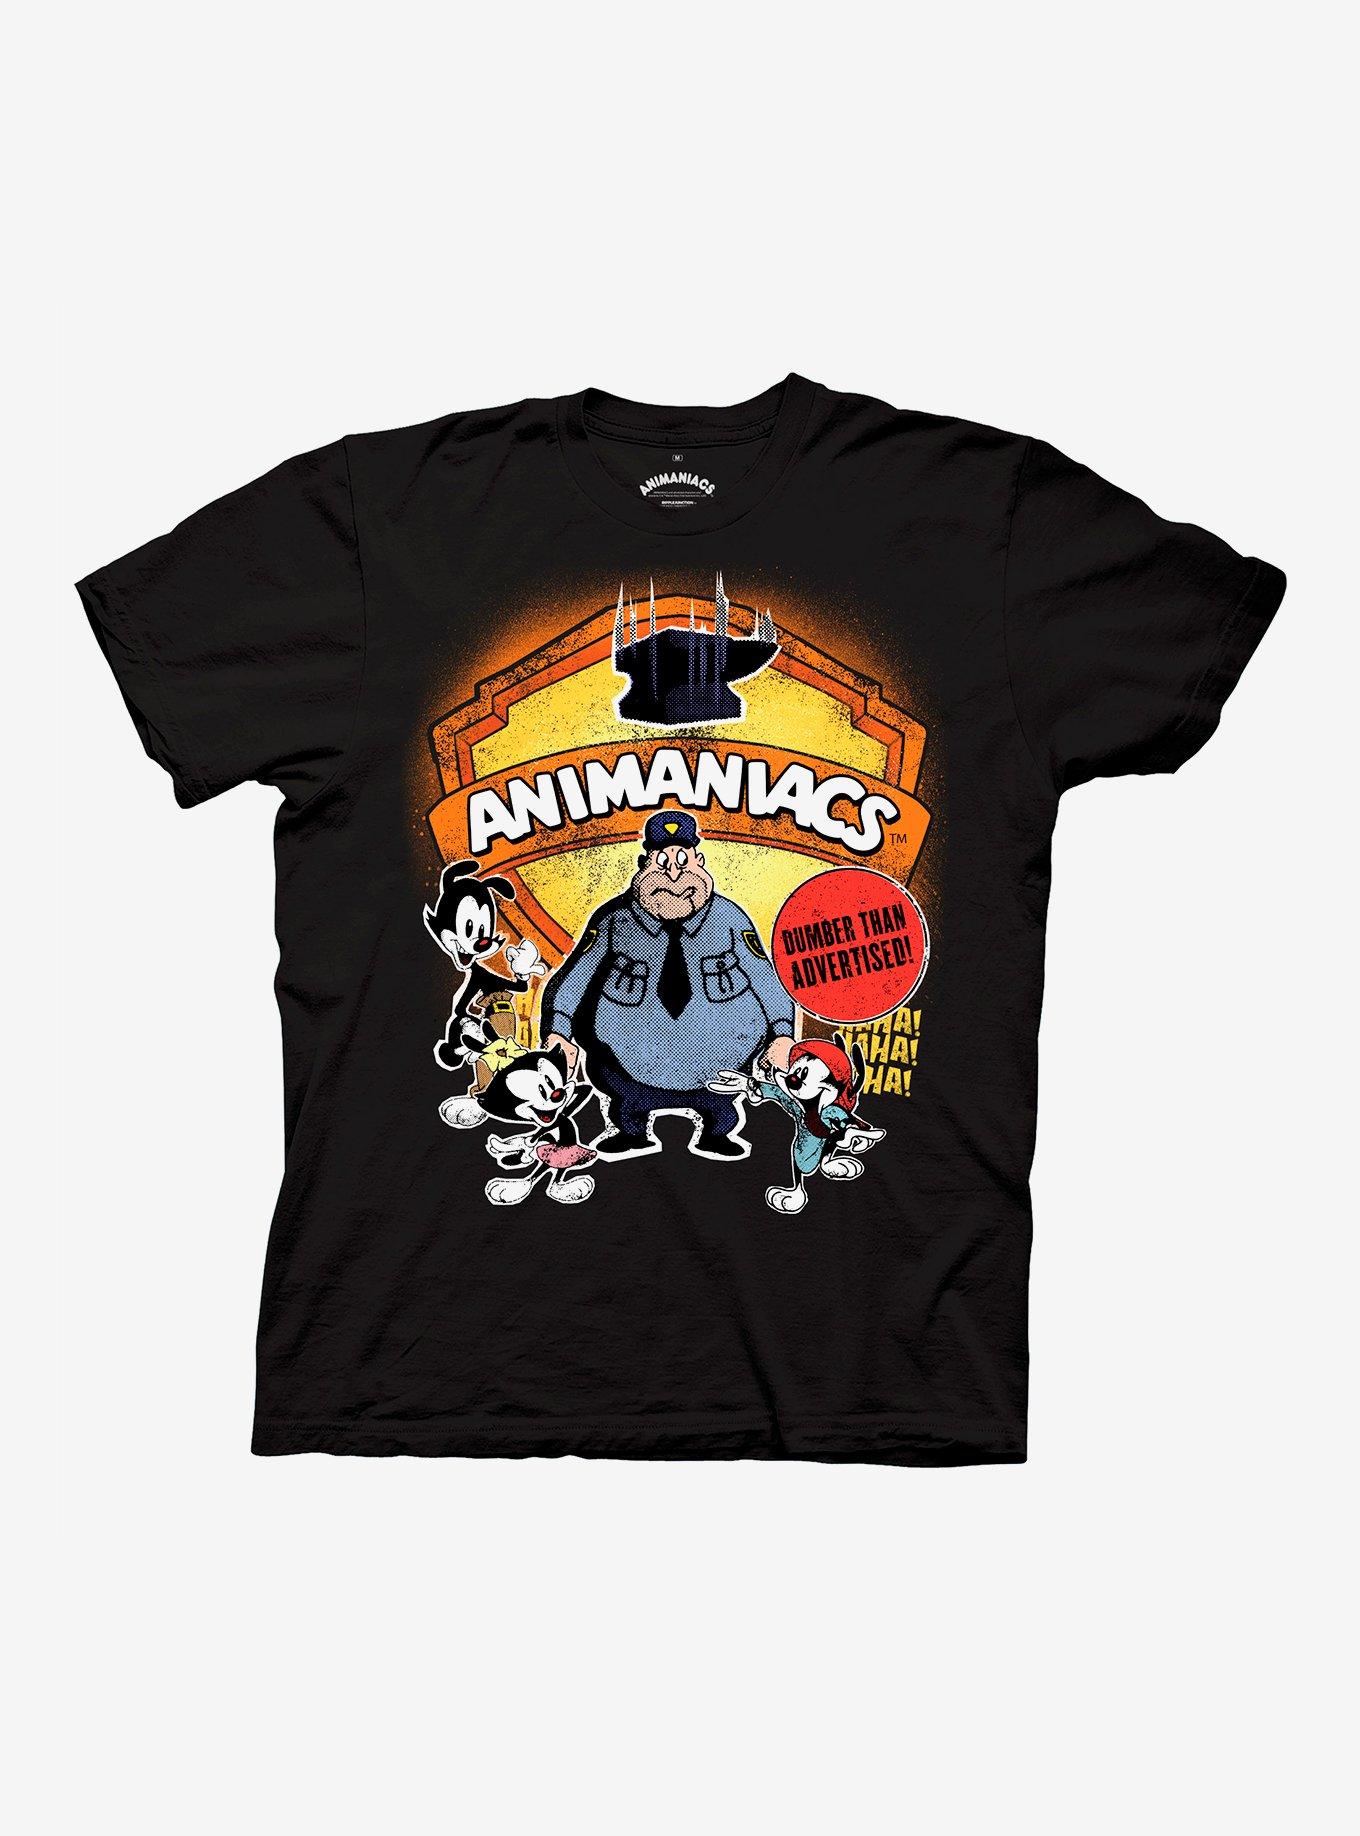 Animaniacs Dumber Than Advertised T-Shirt Hot Topic Exclusive, BLACK, hi-res